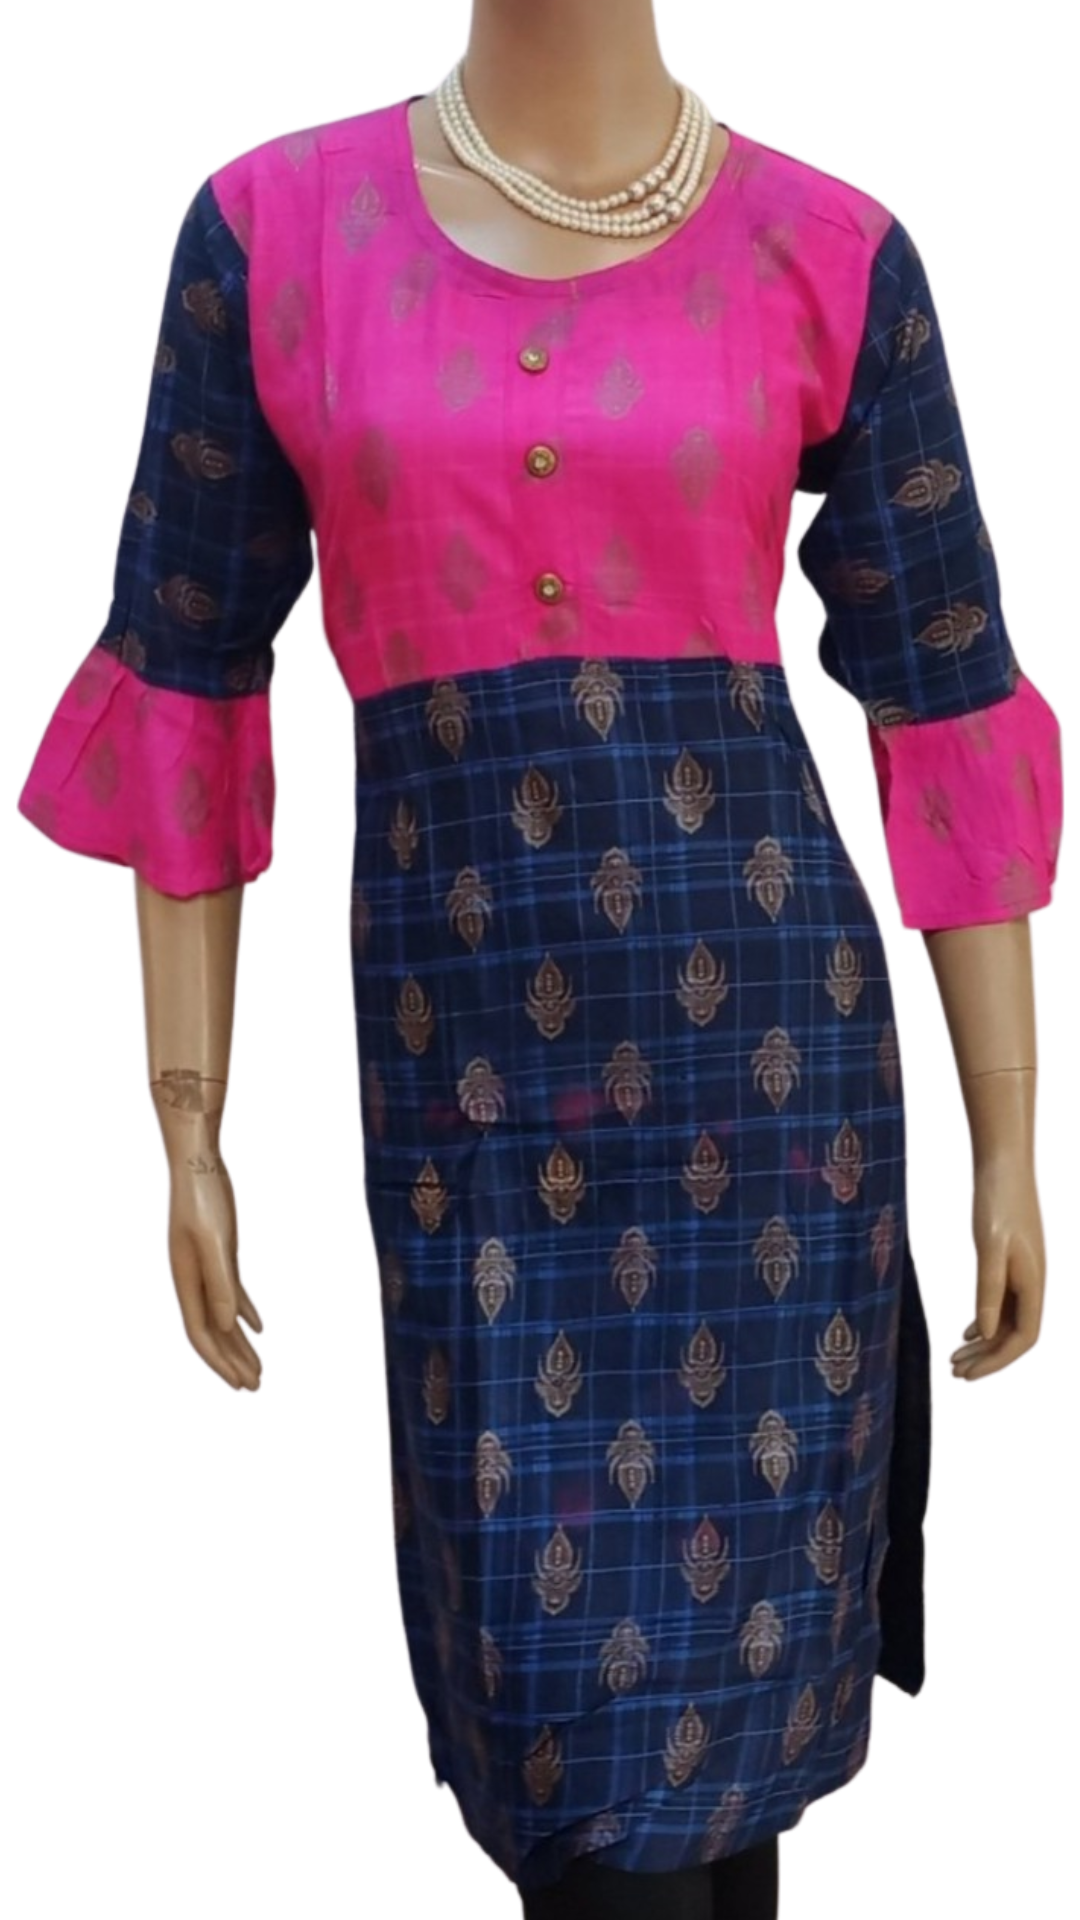 Buy Women Fish Cut Top Online In India At Discounted Prices